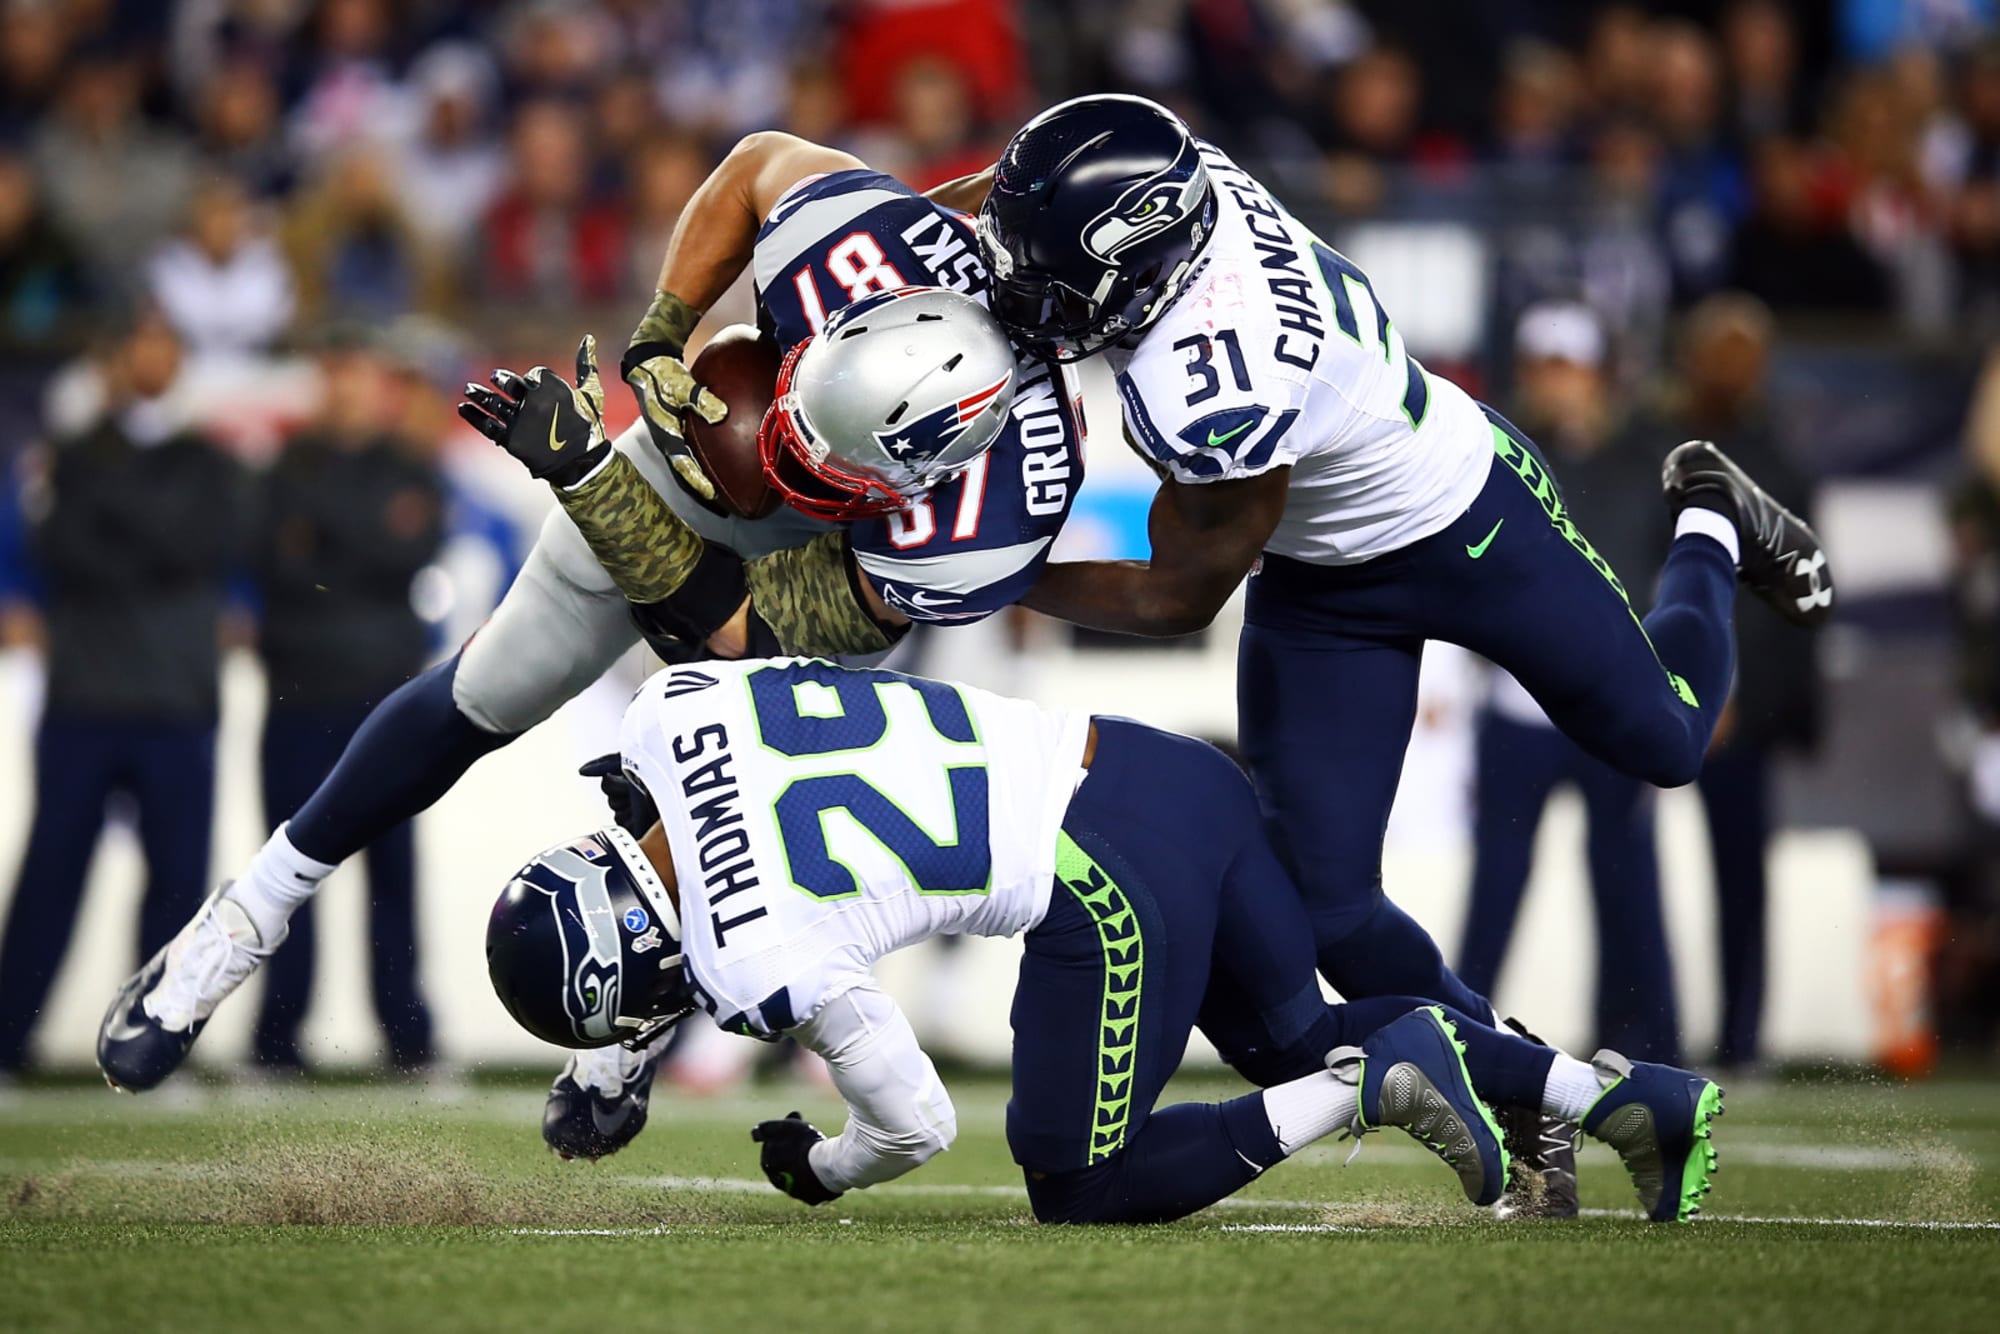 Seahawks versus Patriots: How to watch, stream and listen